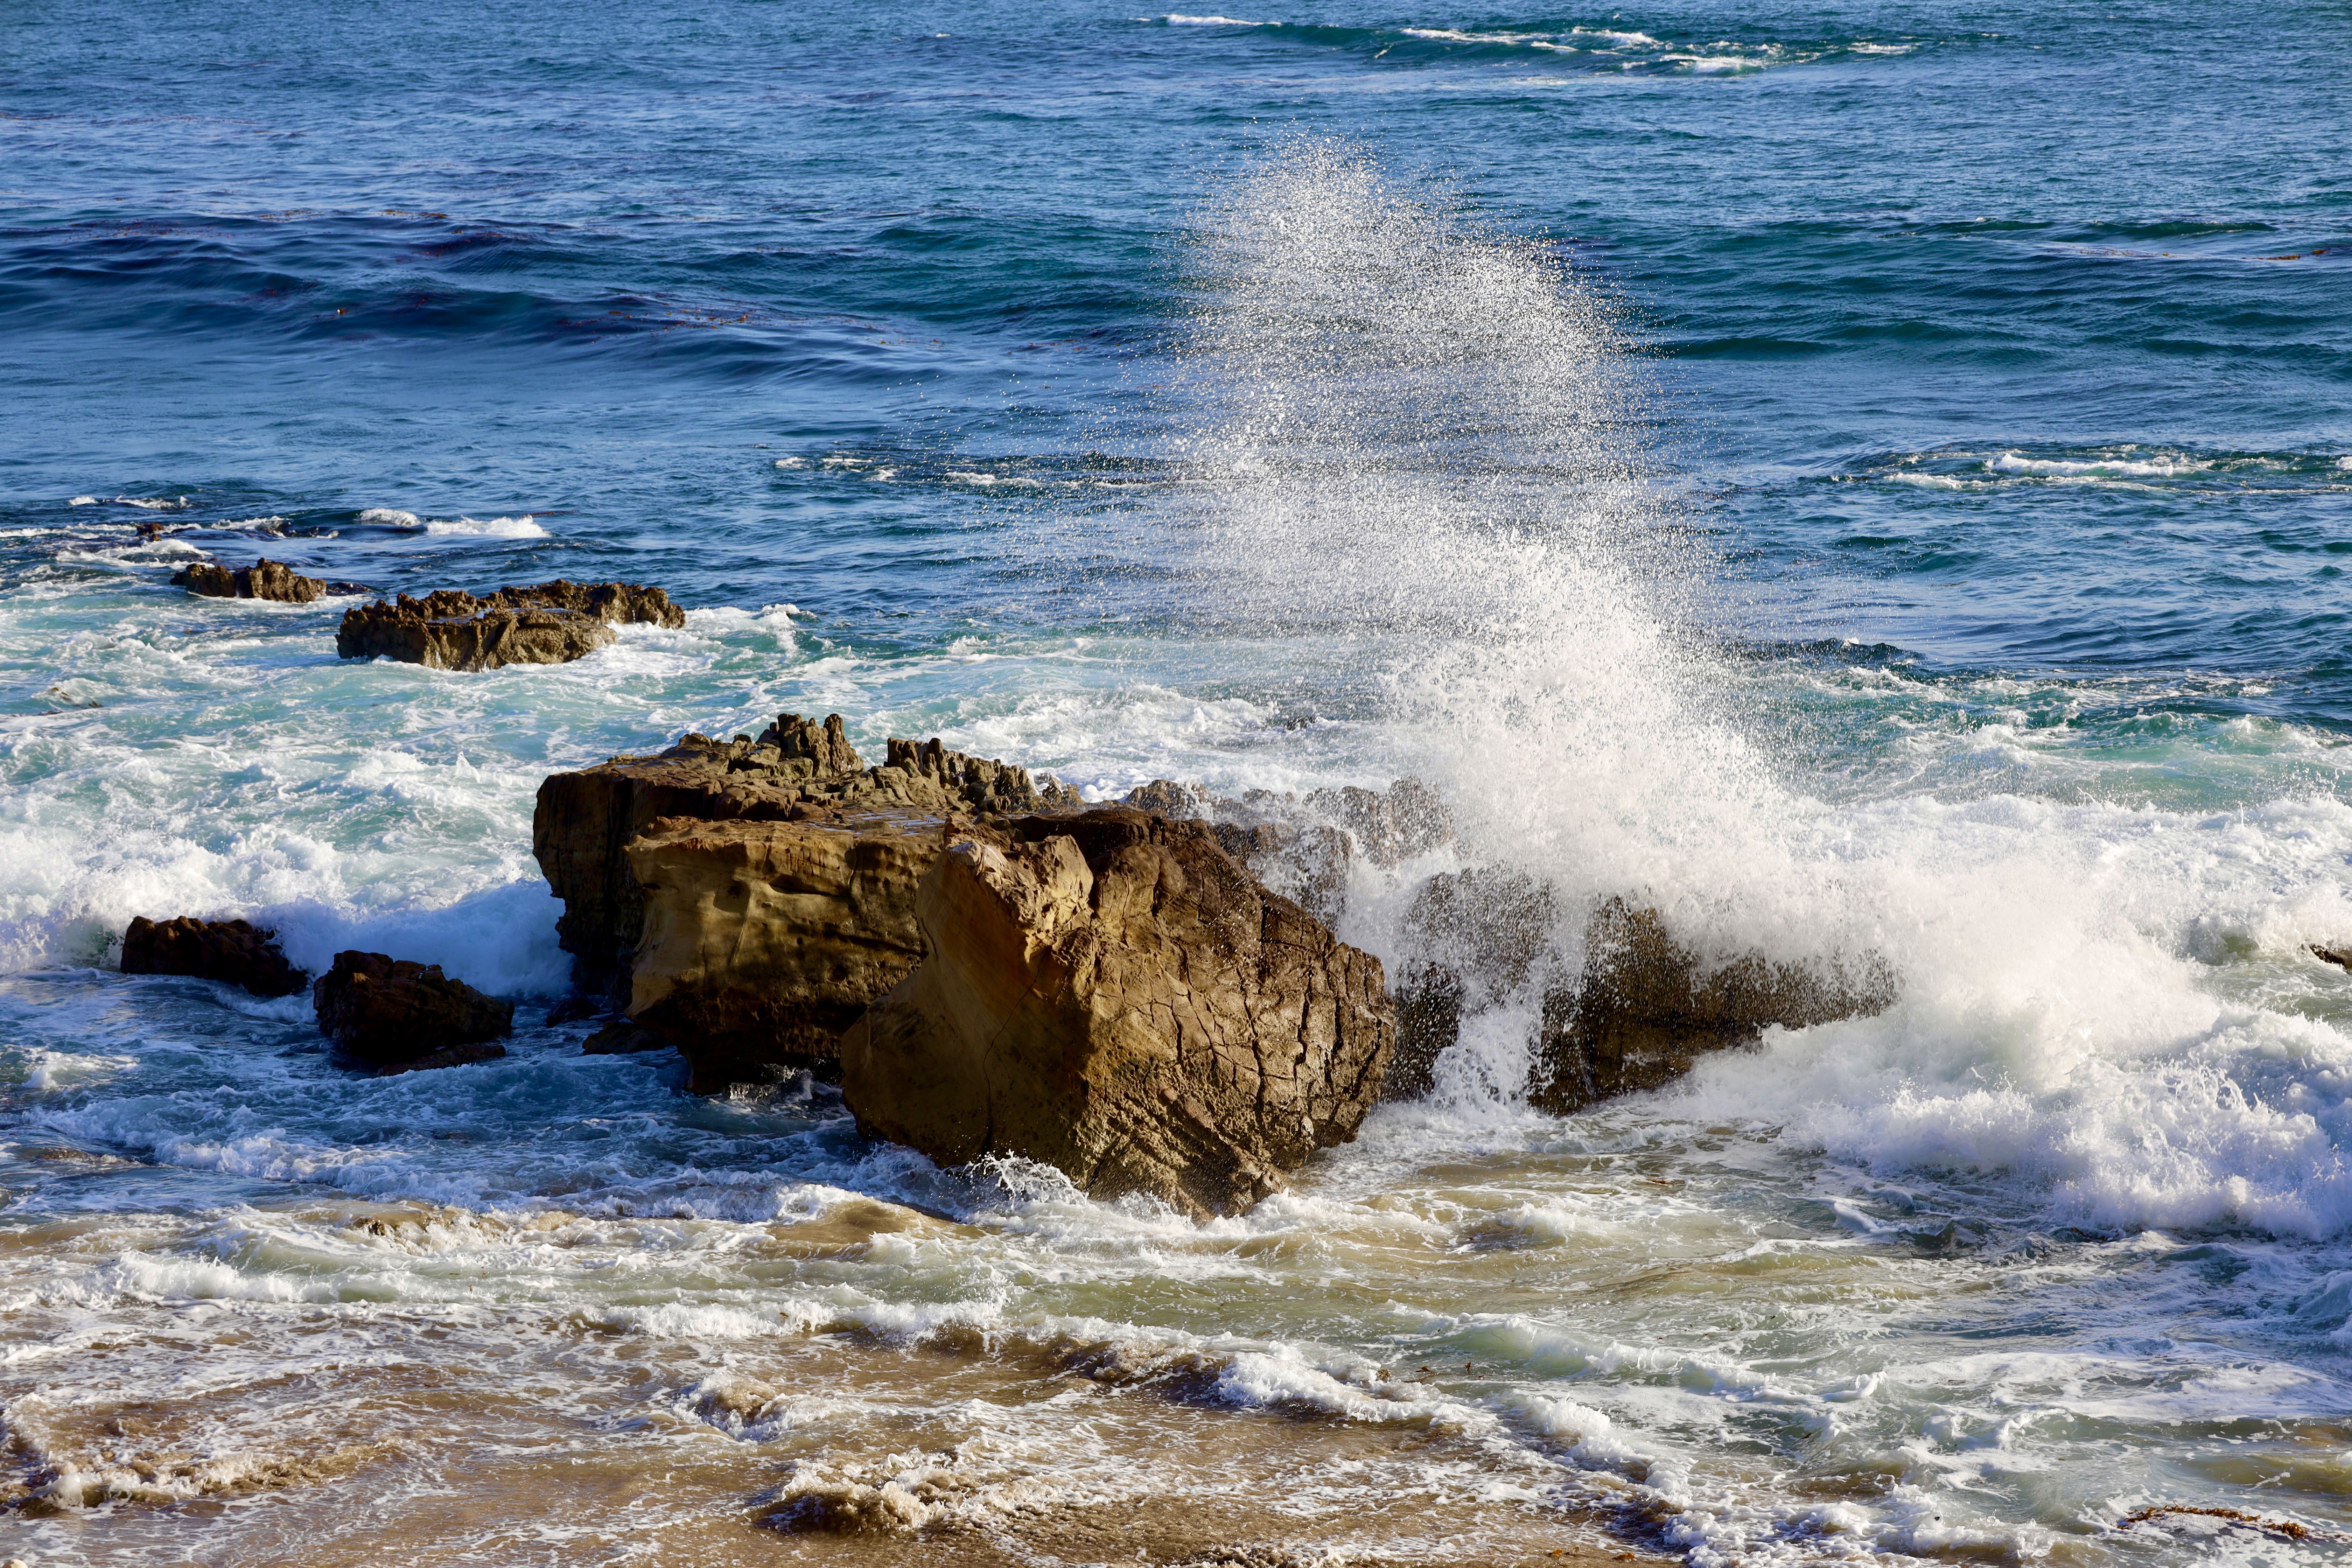 A large rock in the ocean with waves crashing on it.